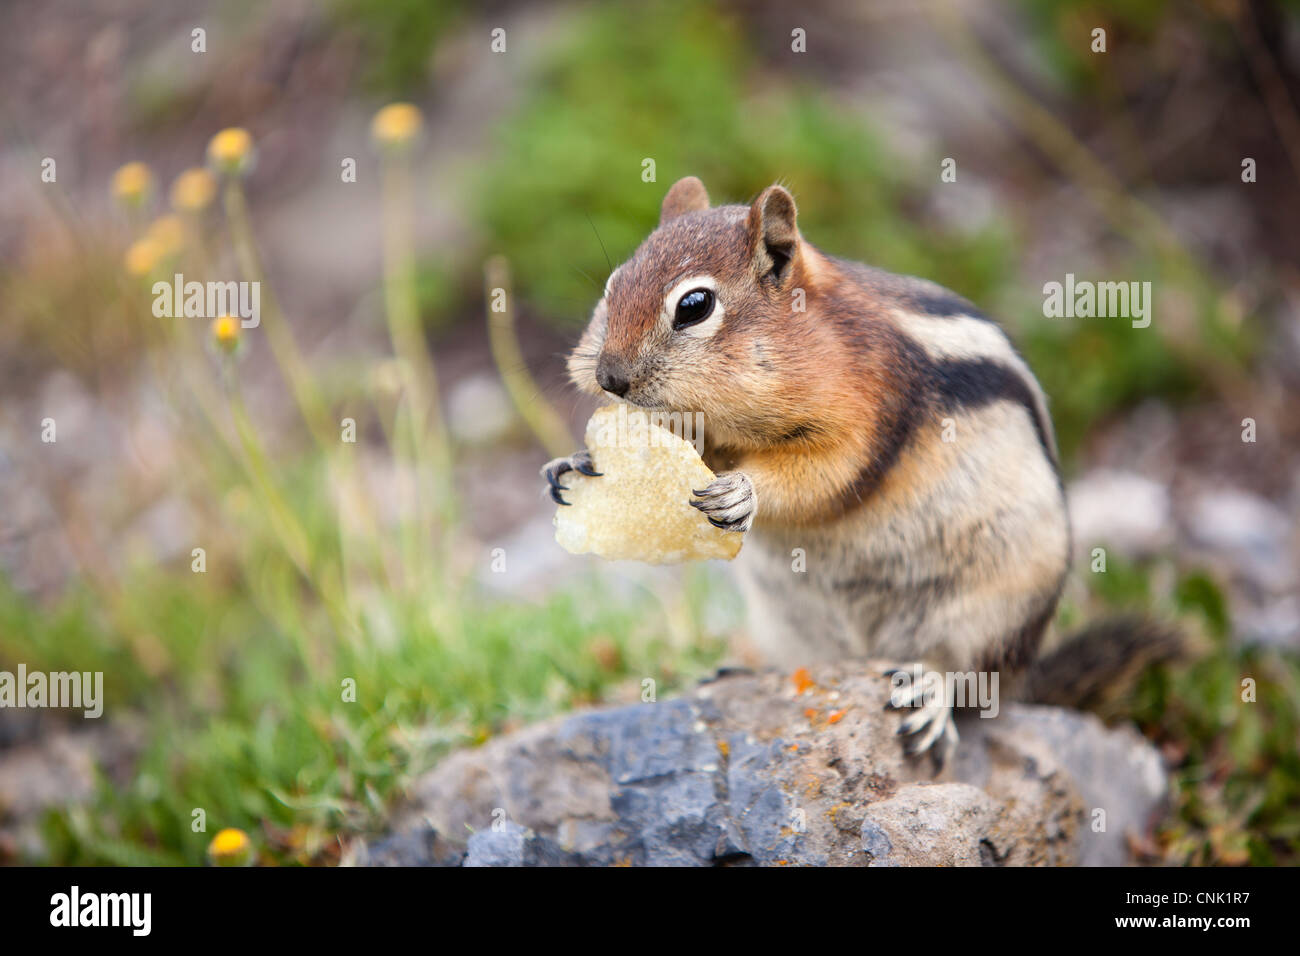 A Golden-mantled Ground Squirrel (Spermophilus lateralis) eating a potato chip in Banff National Park, Alberta, Canada. Stock Photo